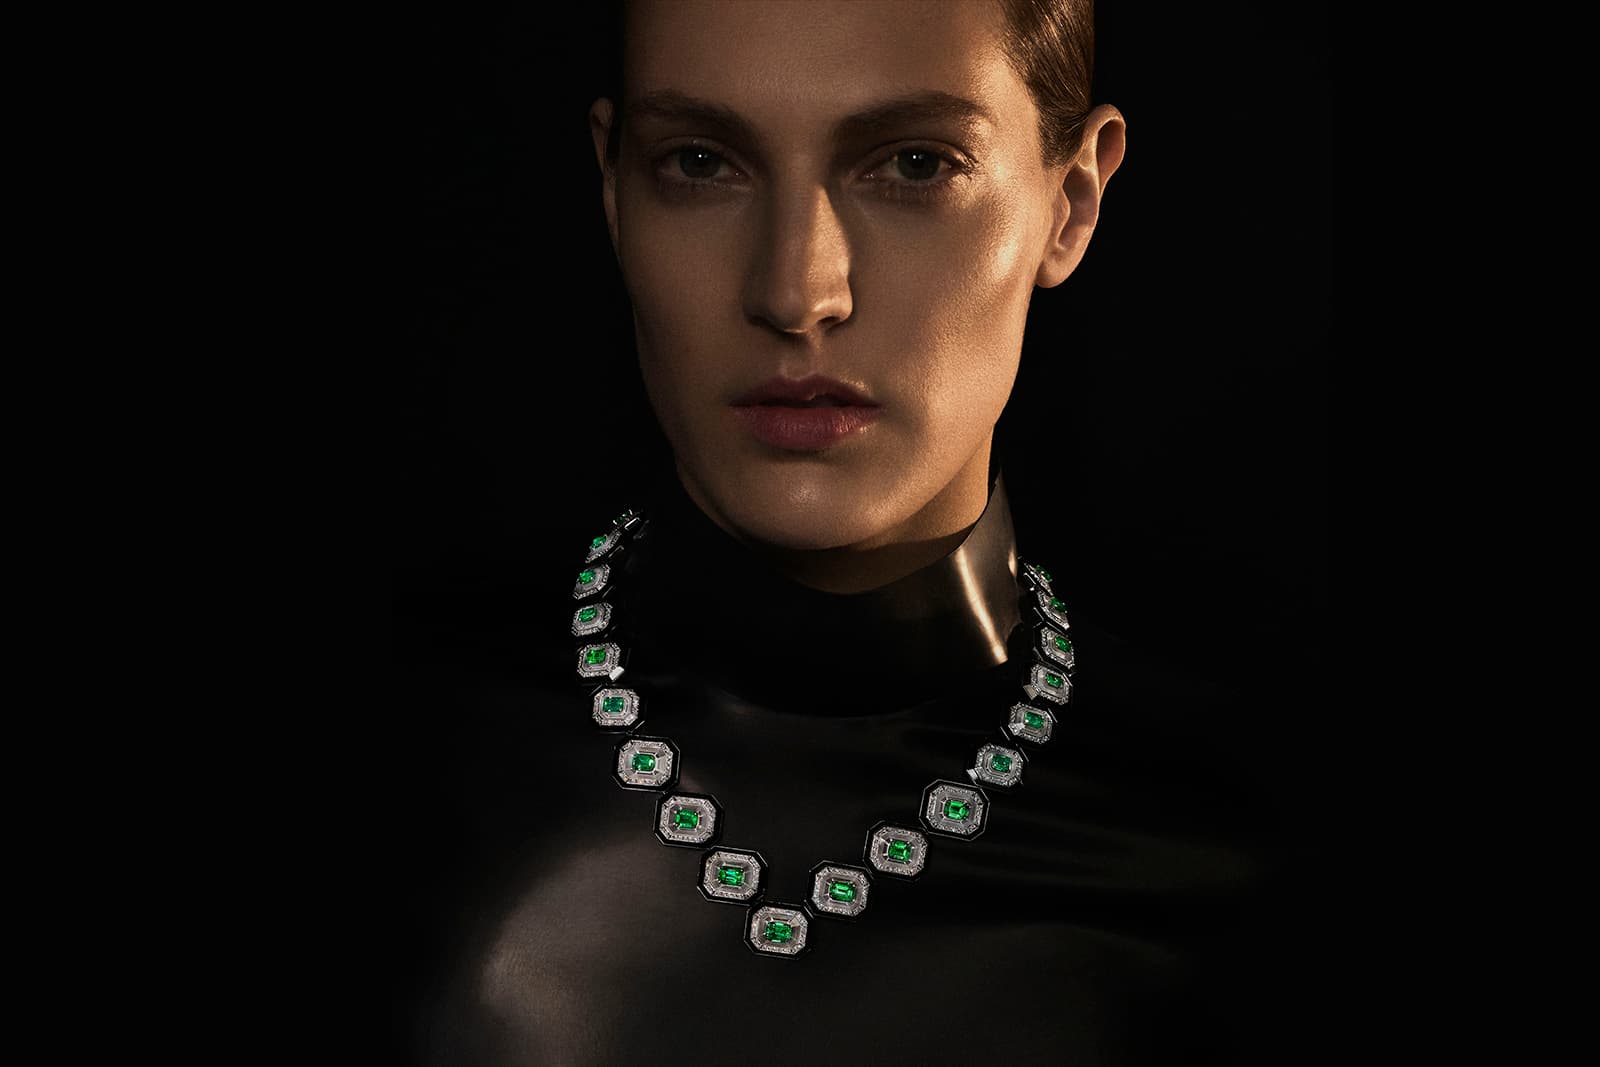 Boucheron Col Émeraudes necklace from the ‘A History of Style, Art Déco’ High Jewellery collection with 28 emeralds of 24.59 carats, set in rock crystal and bordered by black onyx in white gold and platinum